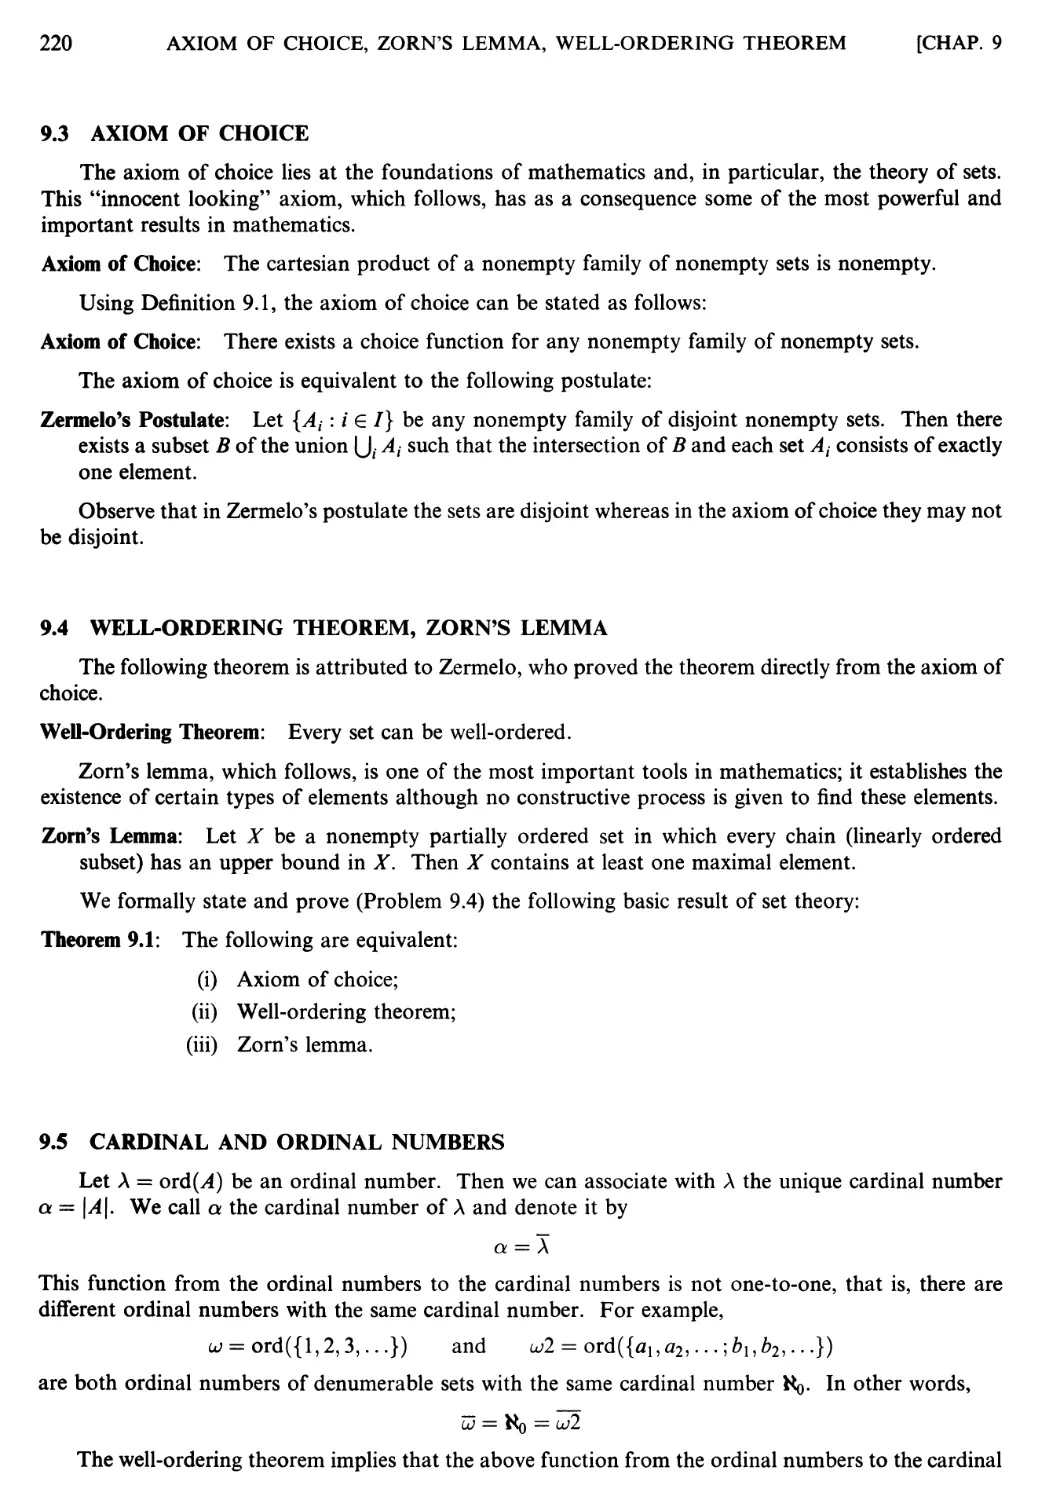 9.3 Axiom of choice
9.4 Well-ordering theorem, Zorn's lemma
9.5 Cardinal and ordinal numbers